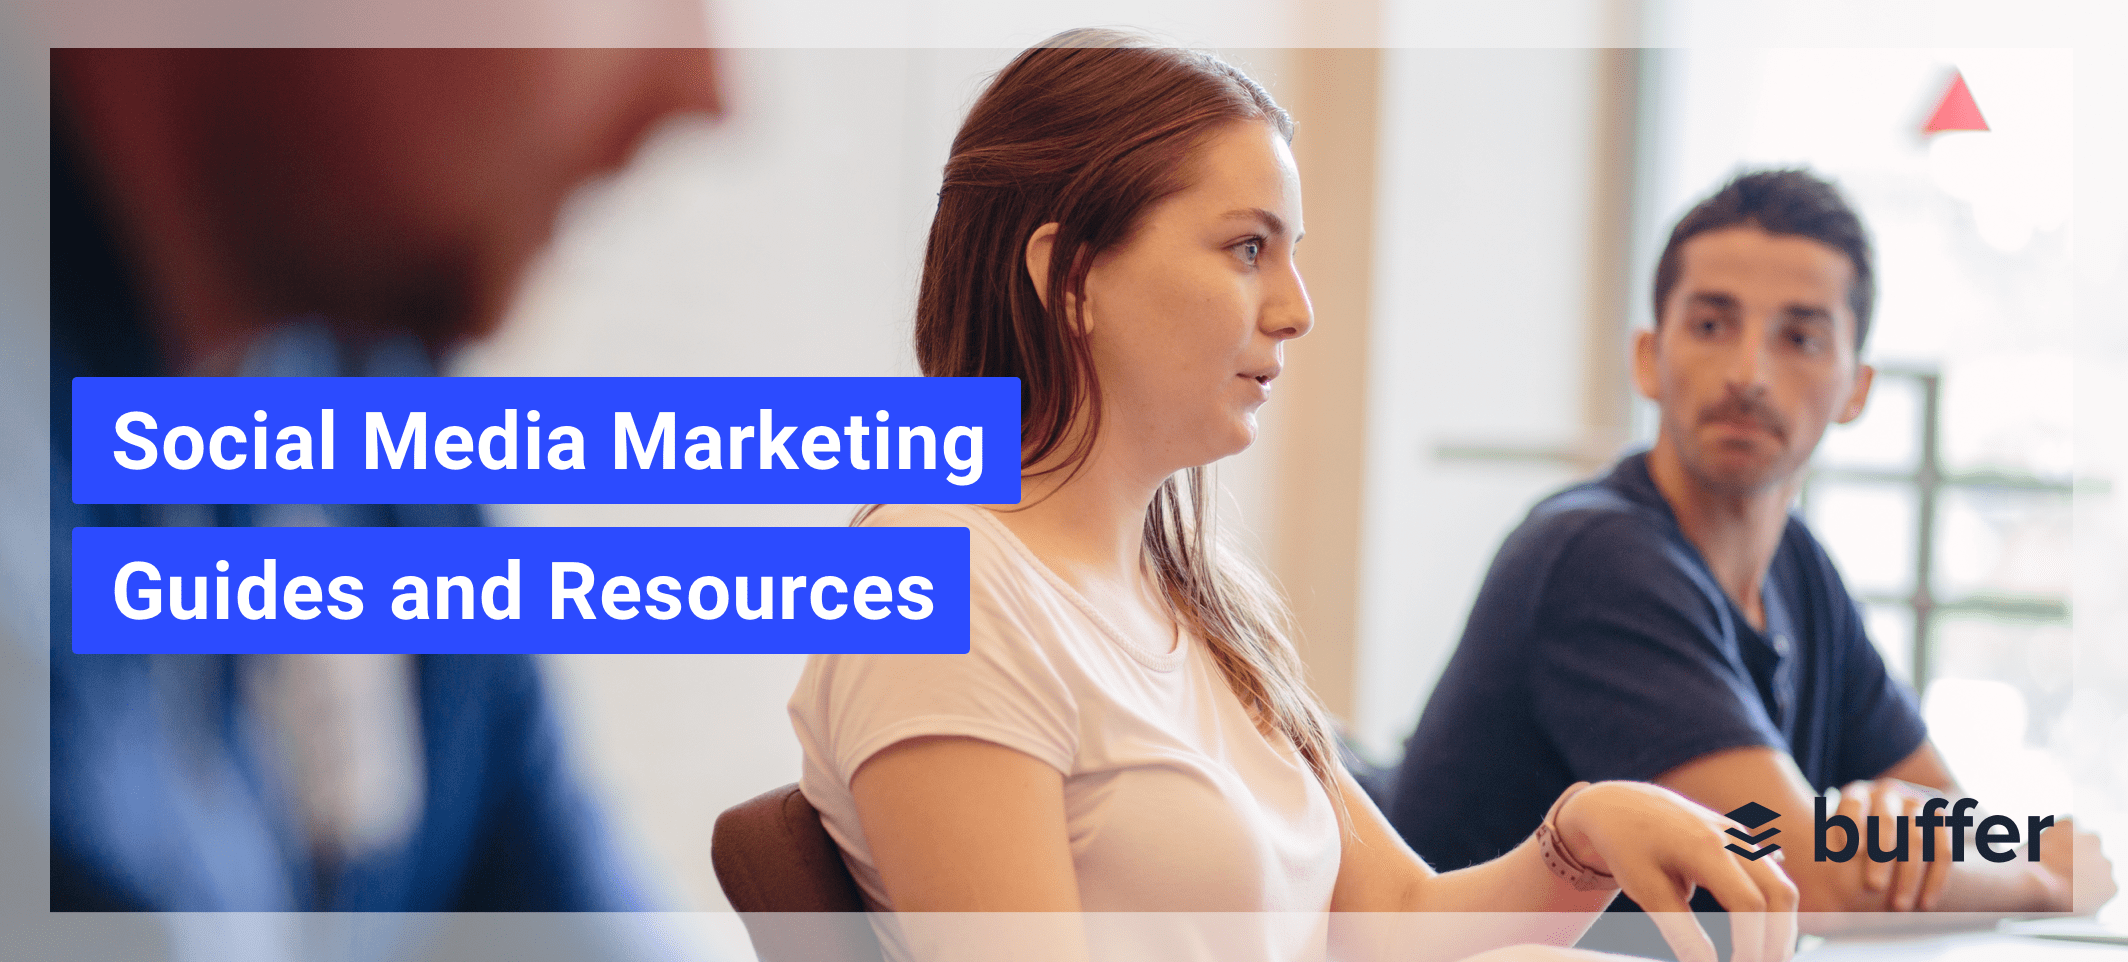 Social media marketing guides and resources